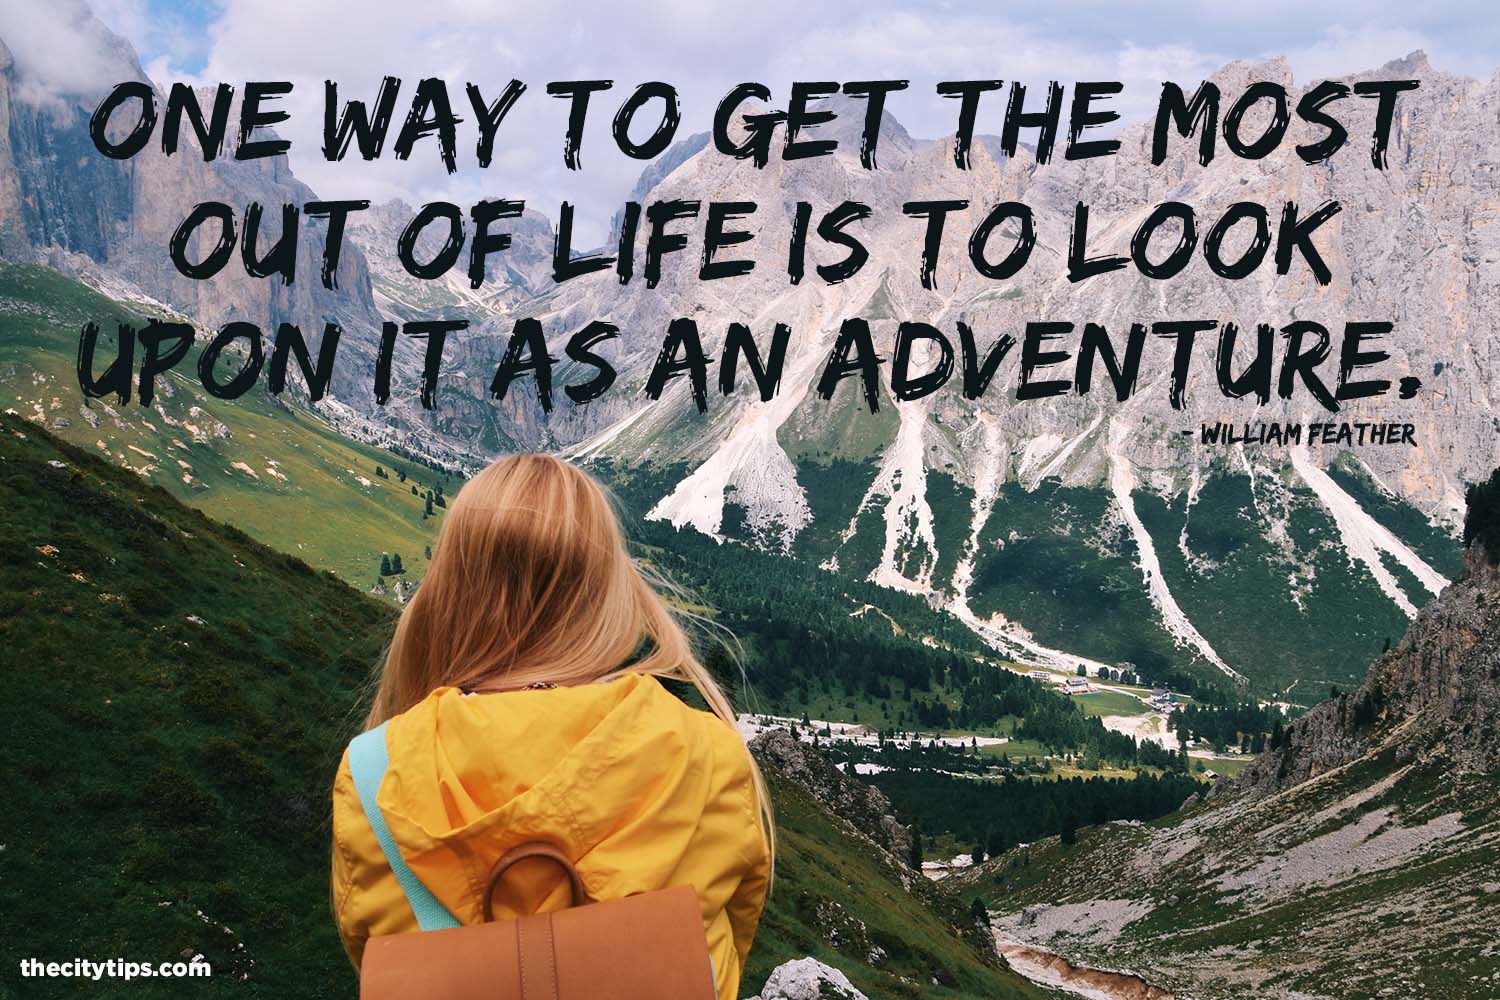 "One way to get the most out of life is to look upon it as an adventure." by William Feather